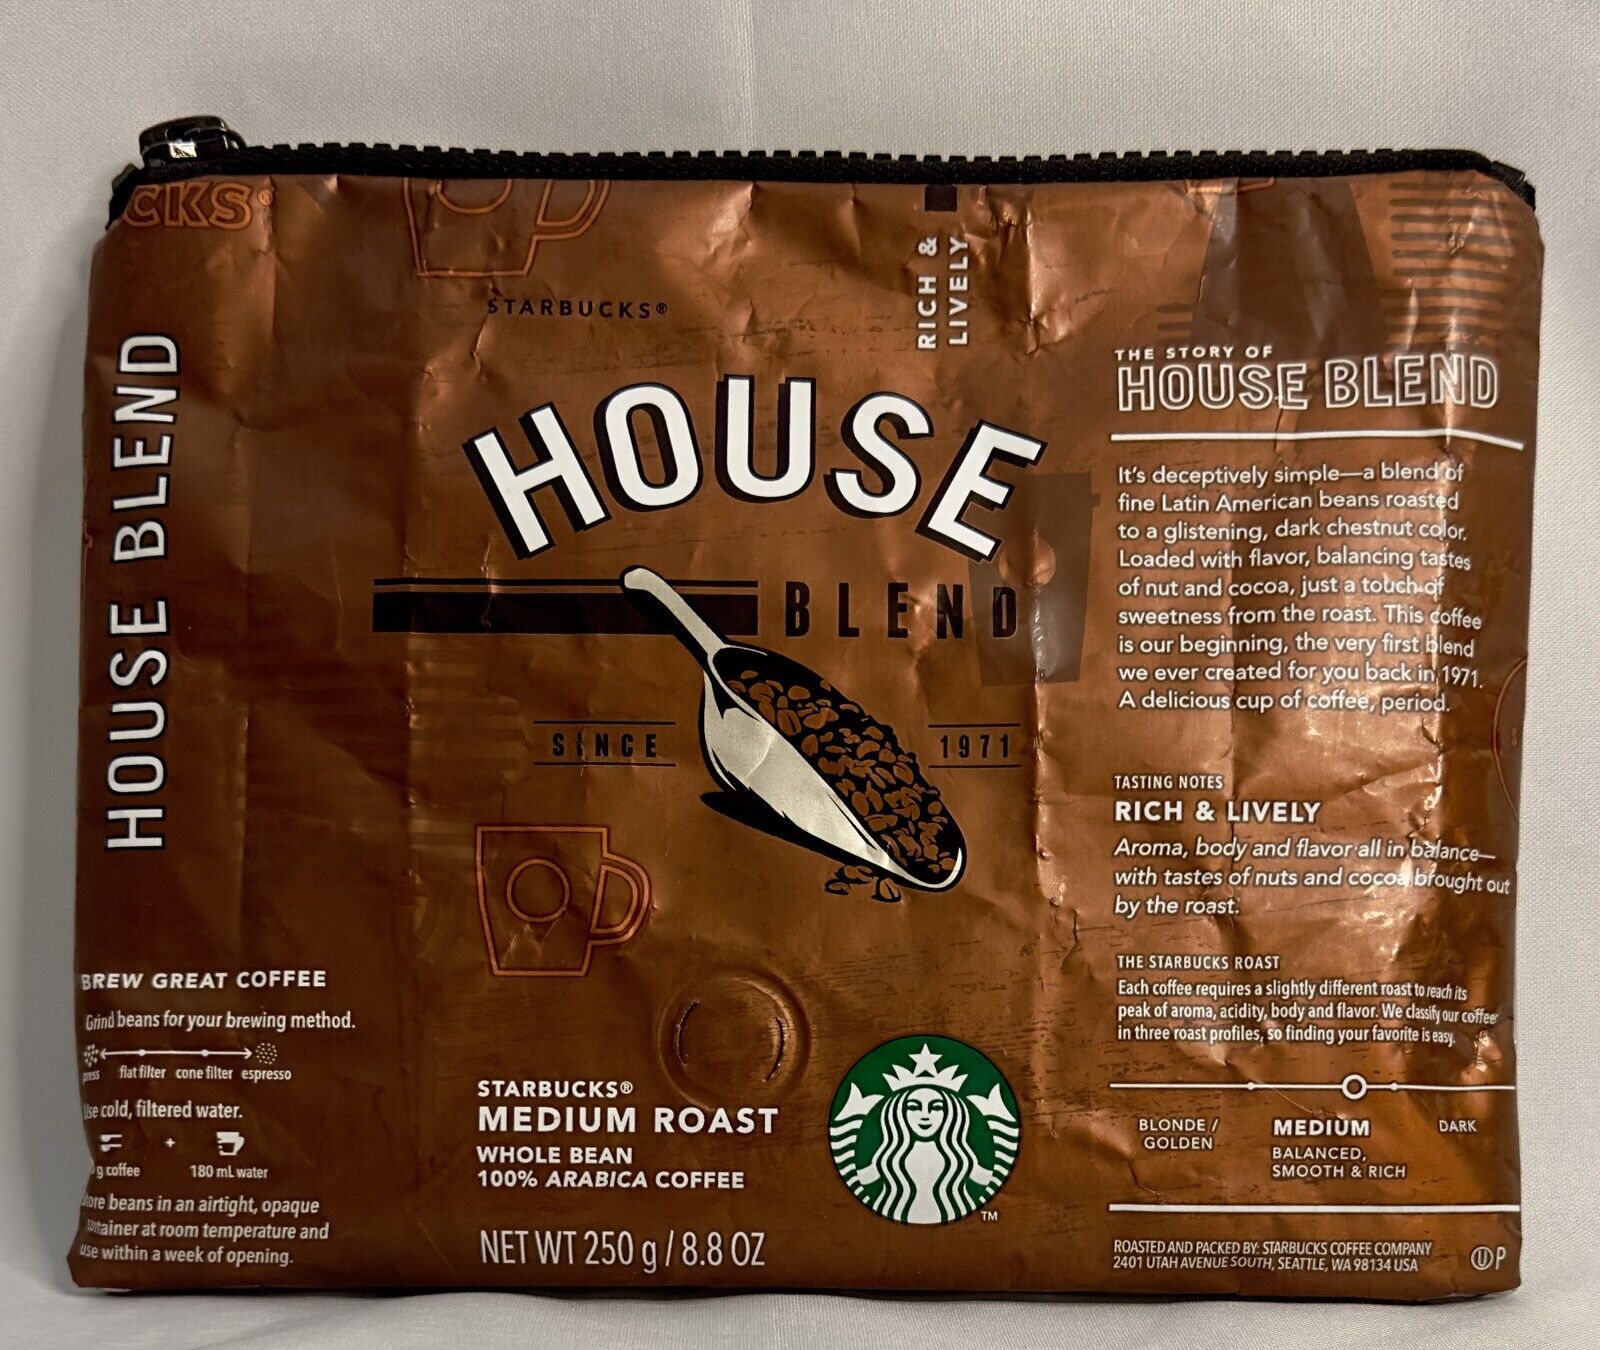 Starbucks Malaysia Upcycled Flavorlock Pouch Coin Purse Bag - House Blend